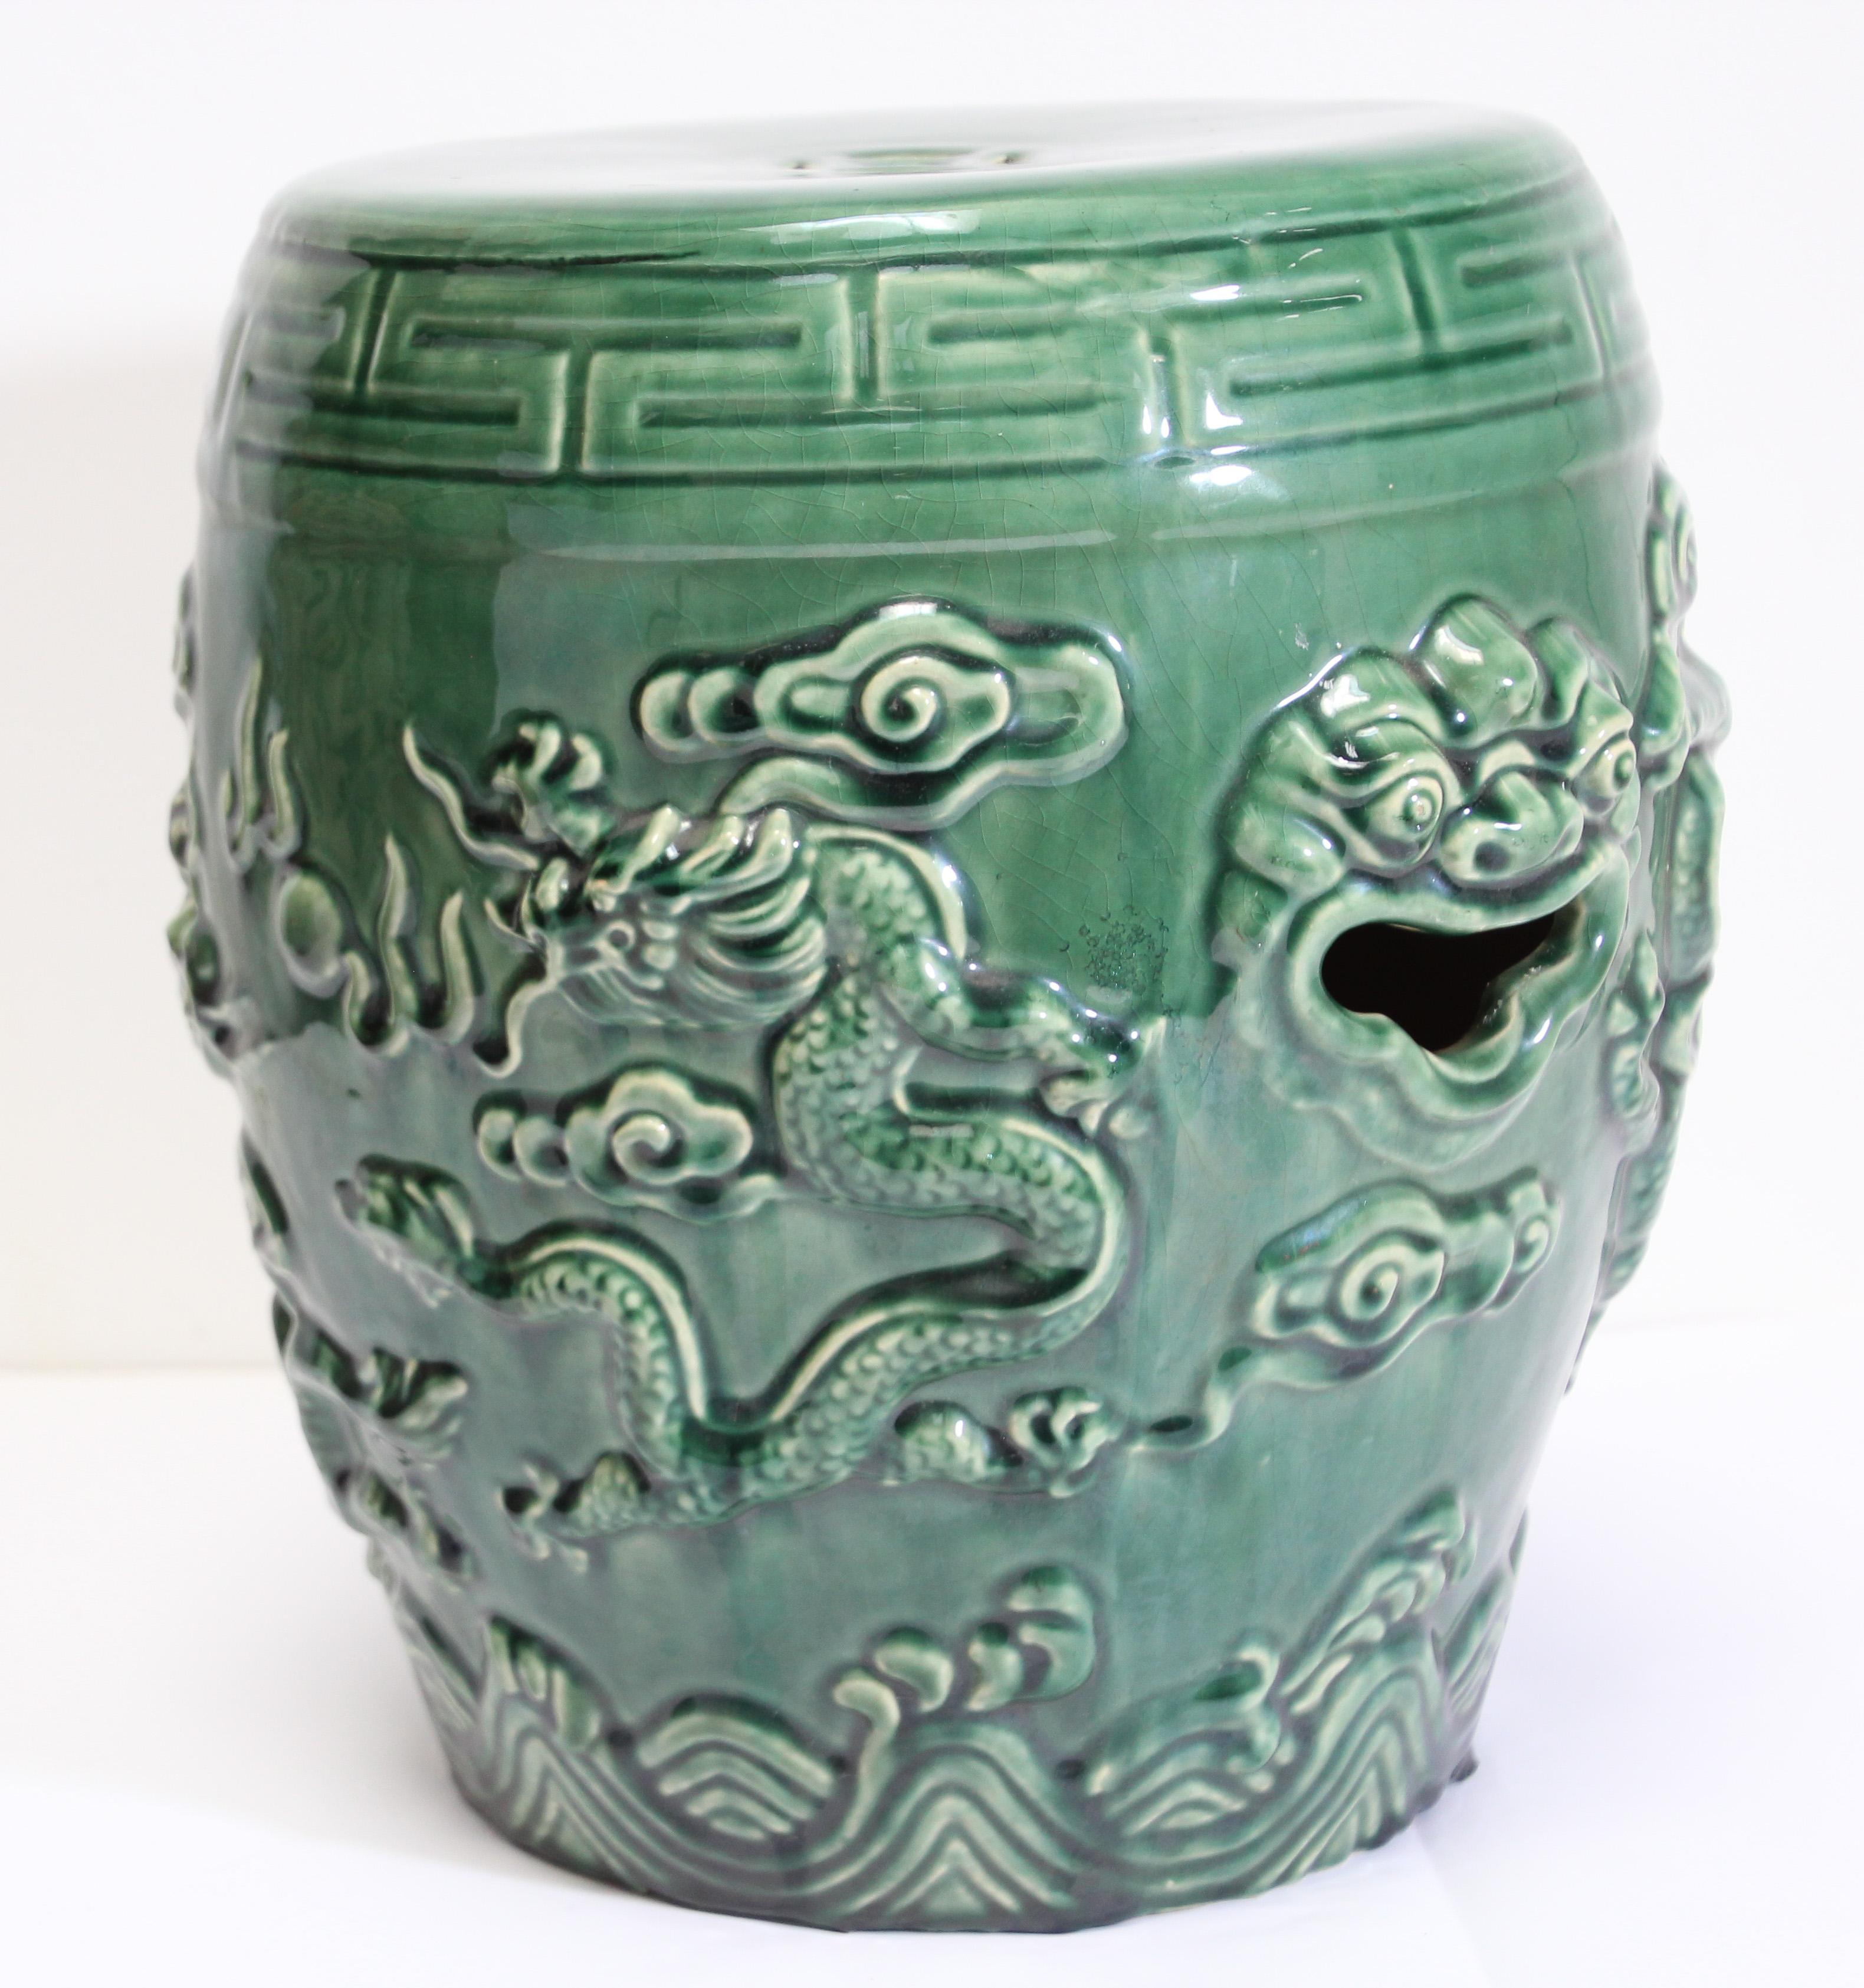 Emerald Green Chinese Ceramic Garden Stool with Dragons 1